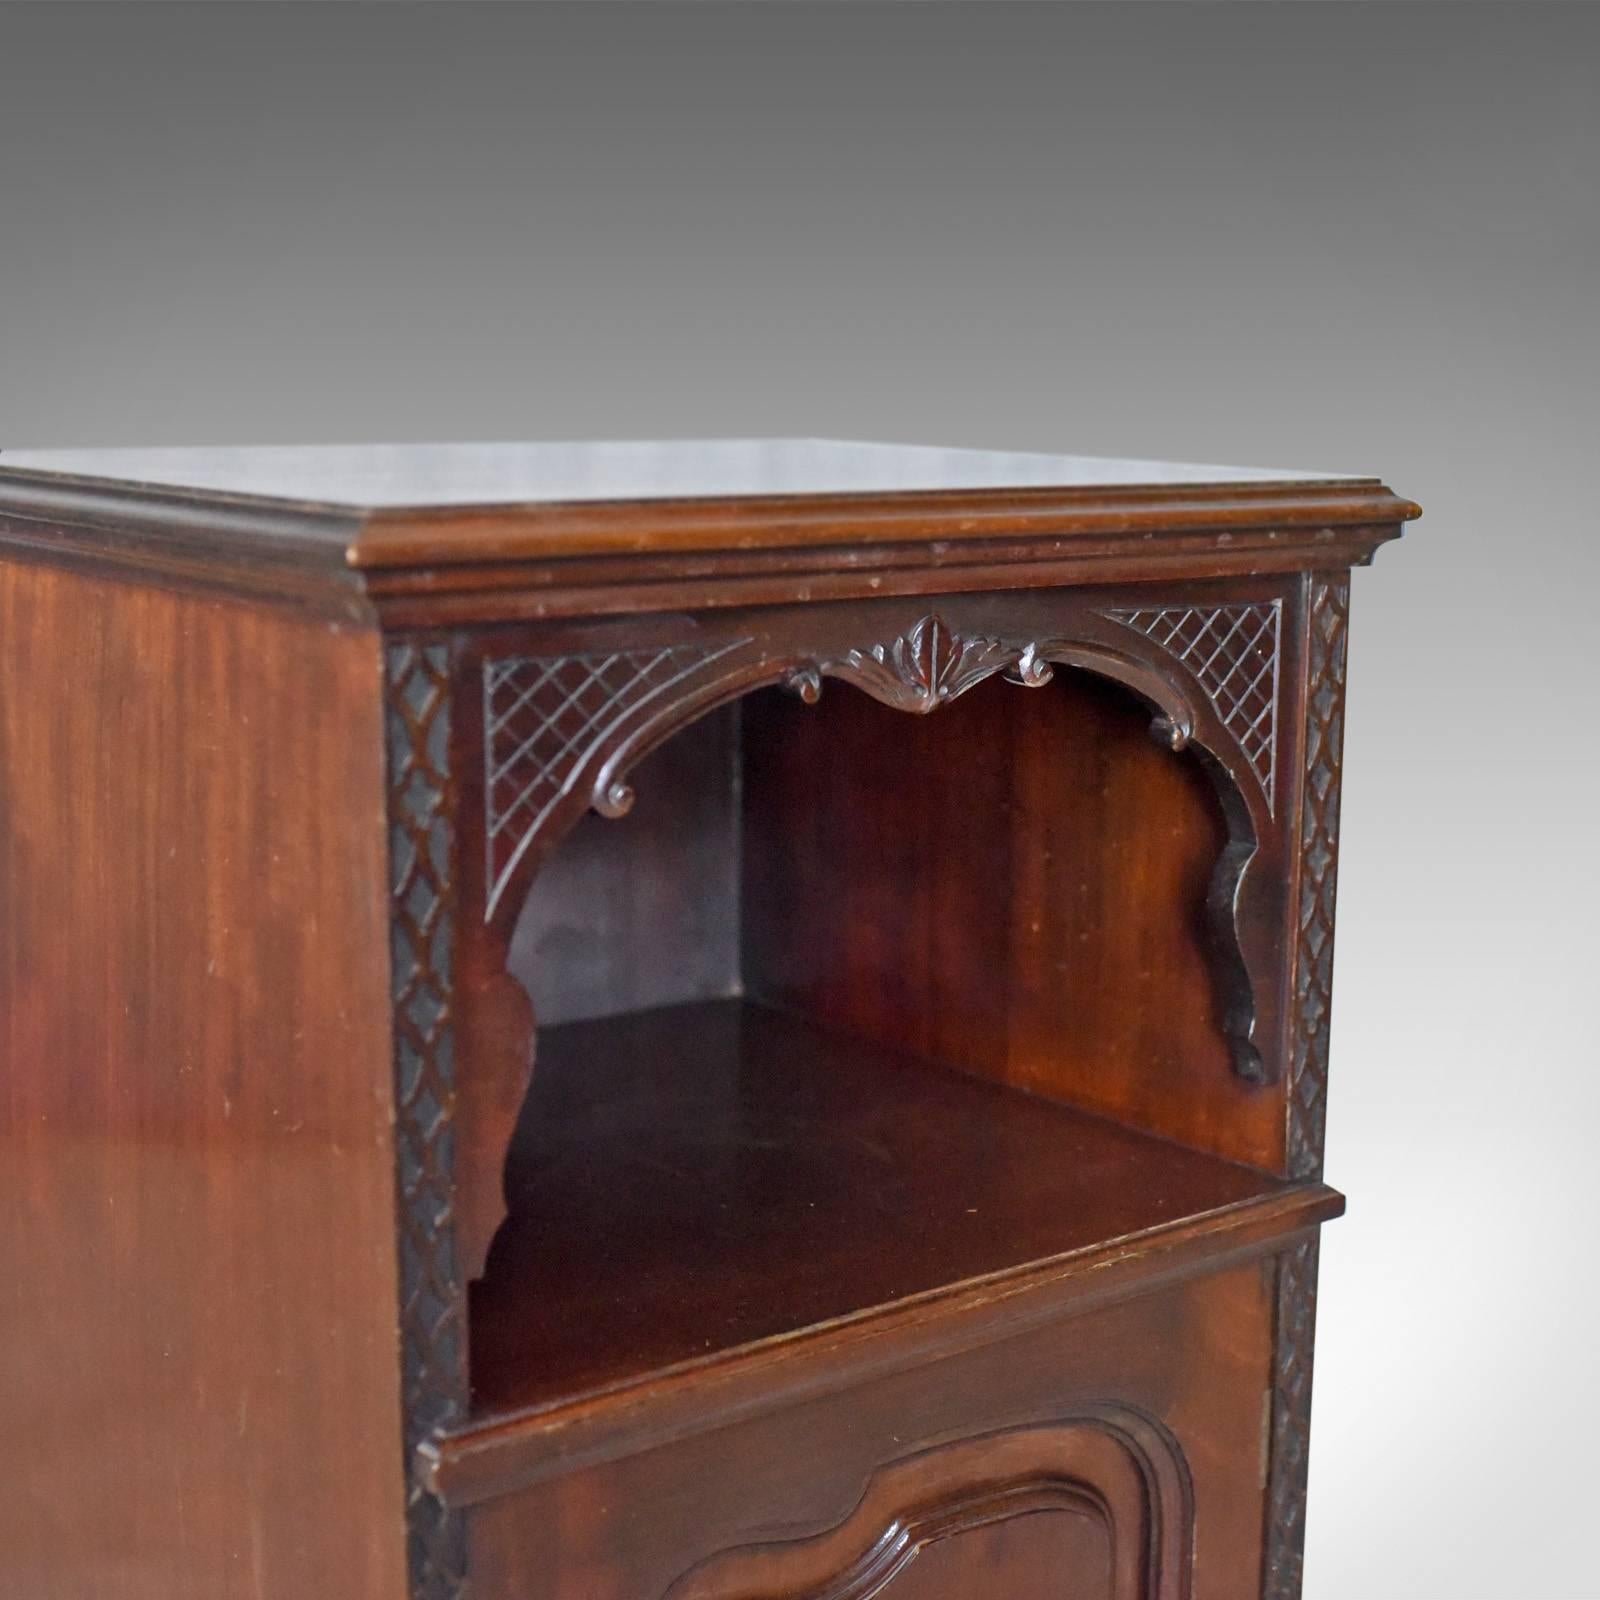 20th Century Antique Bedside Cabinet, Carved Mahogany Nightstand, English, circa 1910